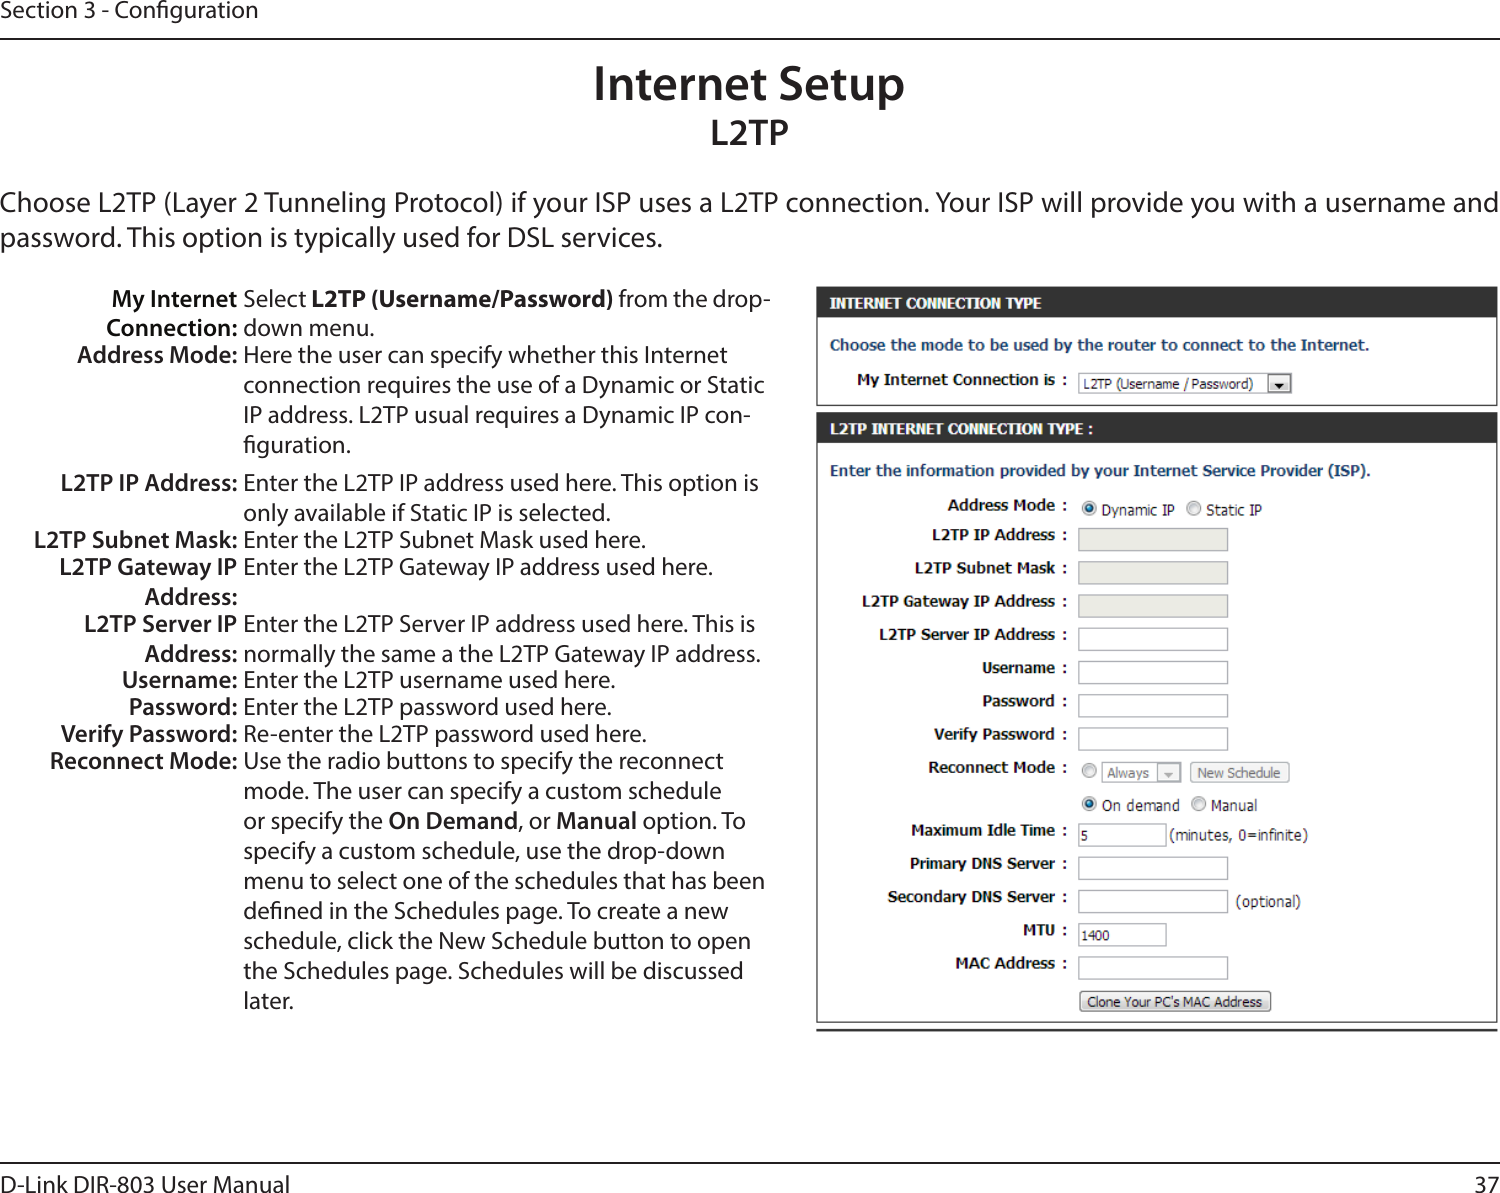 37D-Link DIR-803 User ManualSection 3 - CongurationInternet SetupL2TPChoose L2TP (Layer 2 Tunneling Protocol) if your ISP uses a L2TP connection. Your ISP will provide you with a username and password. This option is typically used for DSL services. My Internet Connection:Select L2TP (Username/Password) from the drop-down menu.Address Mode: Here the user can specify whether this Internet connection requires the use of a Dynamic or Static IP address. L2TP usual requires a Dynamic IP con-guration.L2TP IP Address: Enter the L2TP IP address used here. This option is only available if Static IP is selected.L2TP Subnet Mask: Enter the L2TP Subnet Mask used here.L2TP Gateway IP Address:Enter the L2TP Gateway IP address used here.L2TP Server IP Address:Enter the L2TP Server IP address used here. This is normally the same a the L2TP Gateway IP address.Username: Enter the L2TP username used here.Password: Enter the L2TP password used here.Verify Password: Re-enter the L2TP password used here.Reconnect Mode: Use the radio buttons to specify the reconnect mode. The user can specify a custom schedule or specify the On Demand, or Manual option. To specify a custom schedule, use the drop-down menu to select one of the schedules that has been dened in the Schedules page. To create a new schedule, click the New Schedule button to open the Schedules page. Schedules will be discussed later.